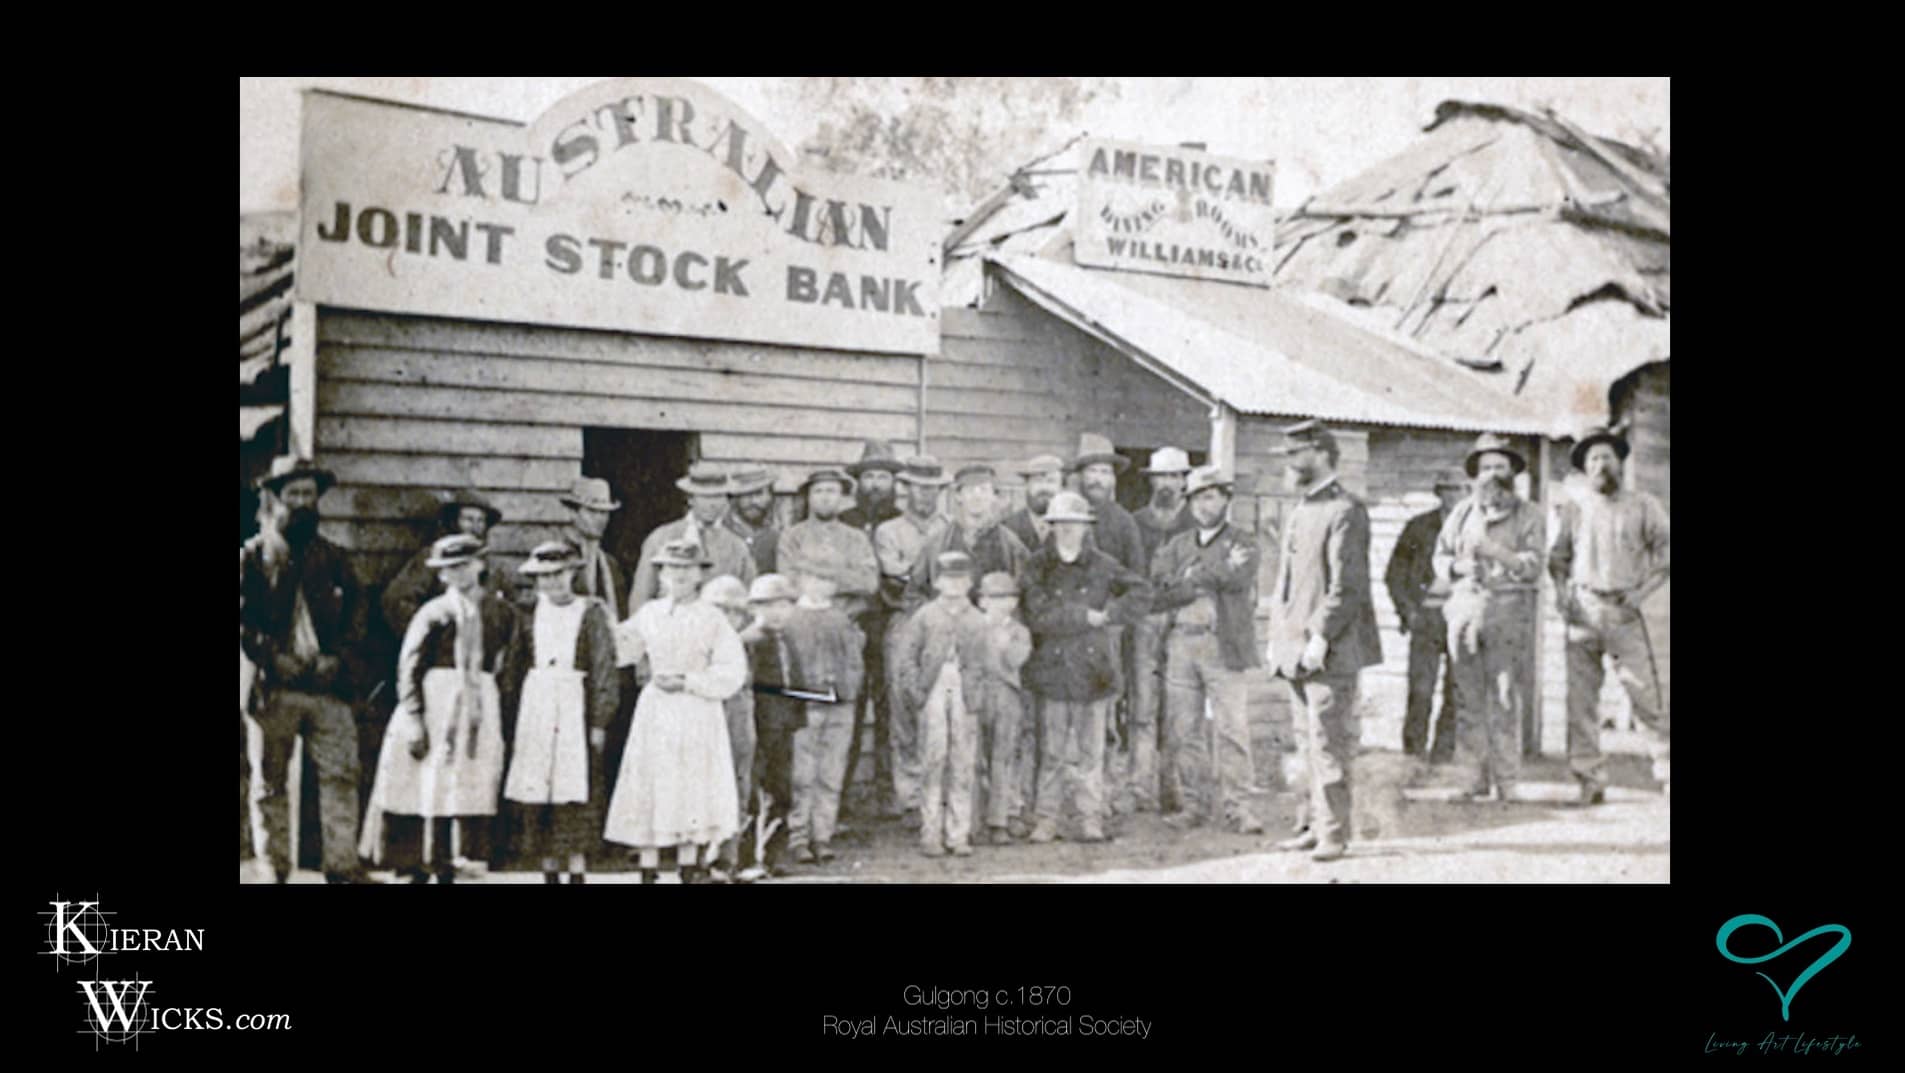 ONE TOWN AT A TIME EP 4 SCREENSHOT 18 - GULGONG NSW c1870 TOWNSFOLK STANDING IN FRONT OF AUSTRALIAN JOINT STOCK BANK - ROYAL AUSTRALIAN HISTORICAL SOCIETY